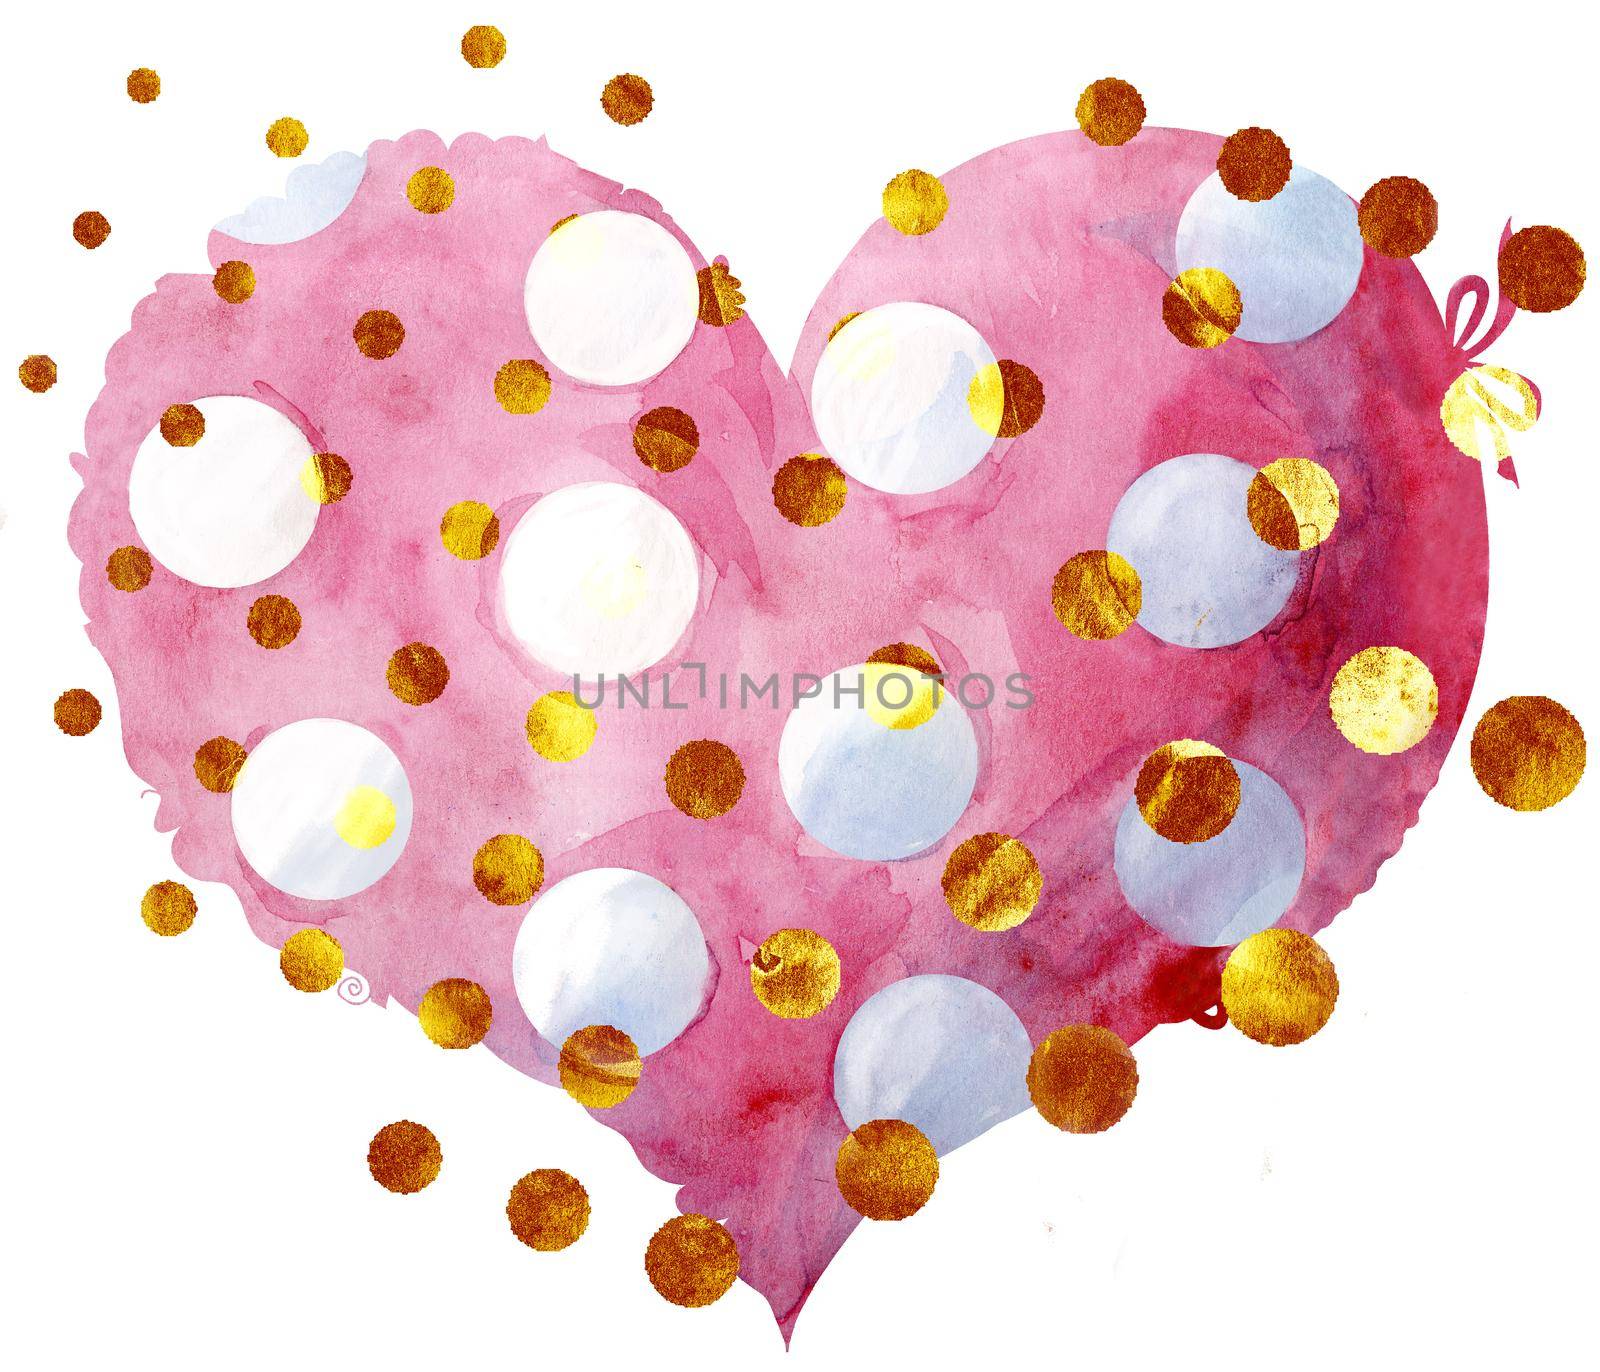 Watercolor pink heart with polka dots and a lace edge with gold dots on a white background.